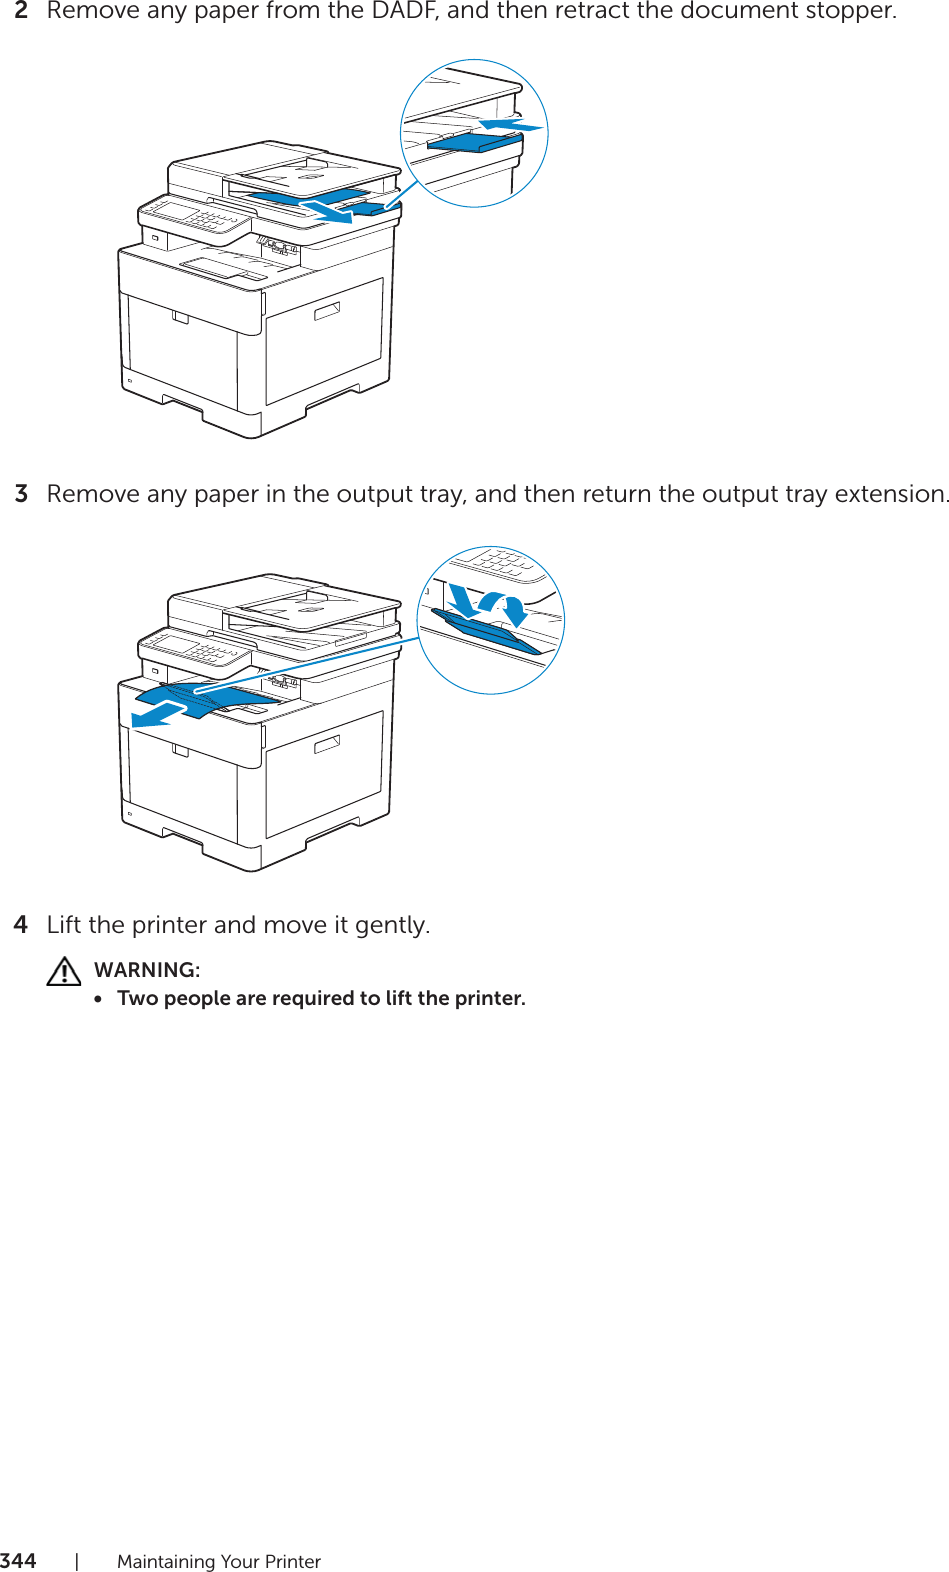 344| Maintaining Your Printer2Remove any paper from the DADF, and then retract the document stopper.3Remove any paper in the output tray, and then return the output tray extension.4Lift the printer and move it gently.WARNING:• Two people are required to lift the printer.